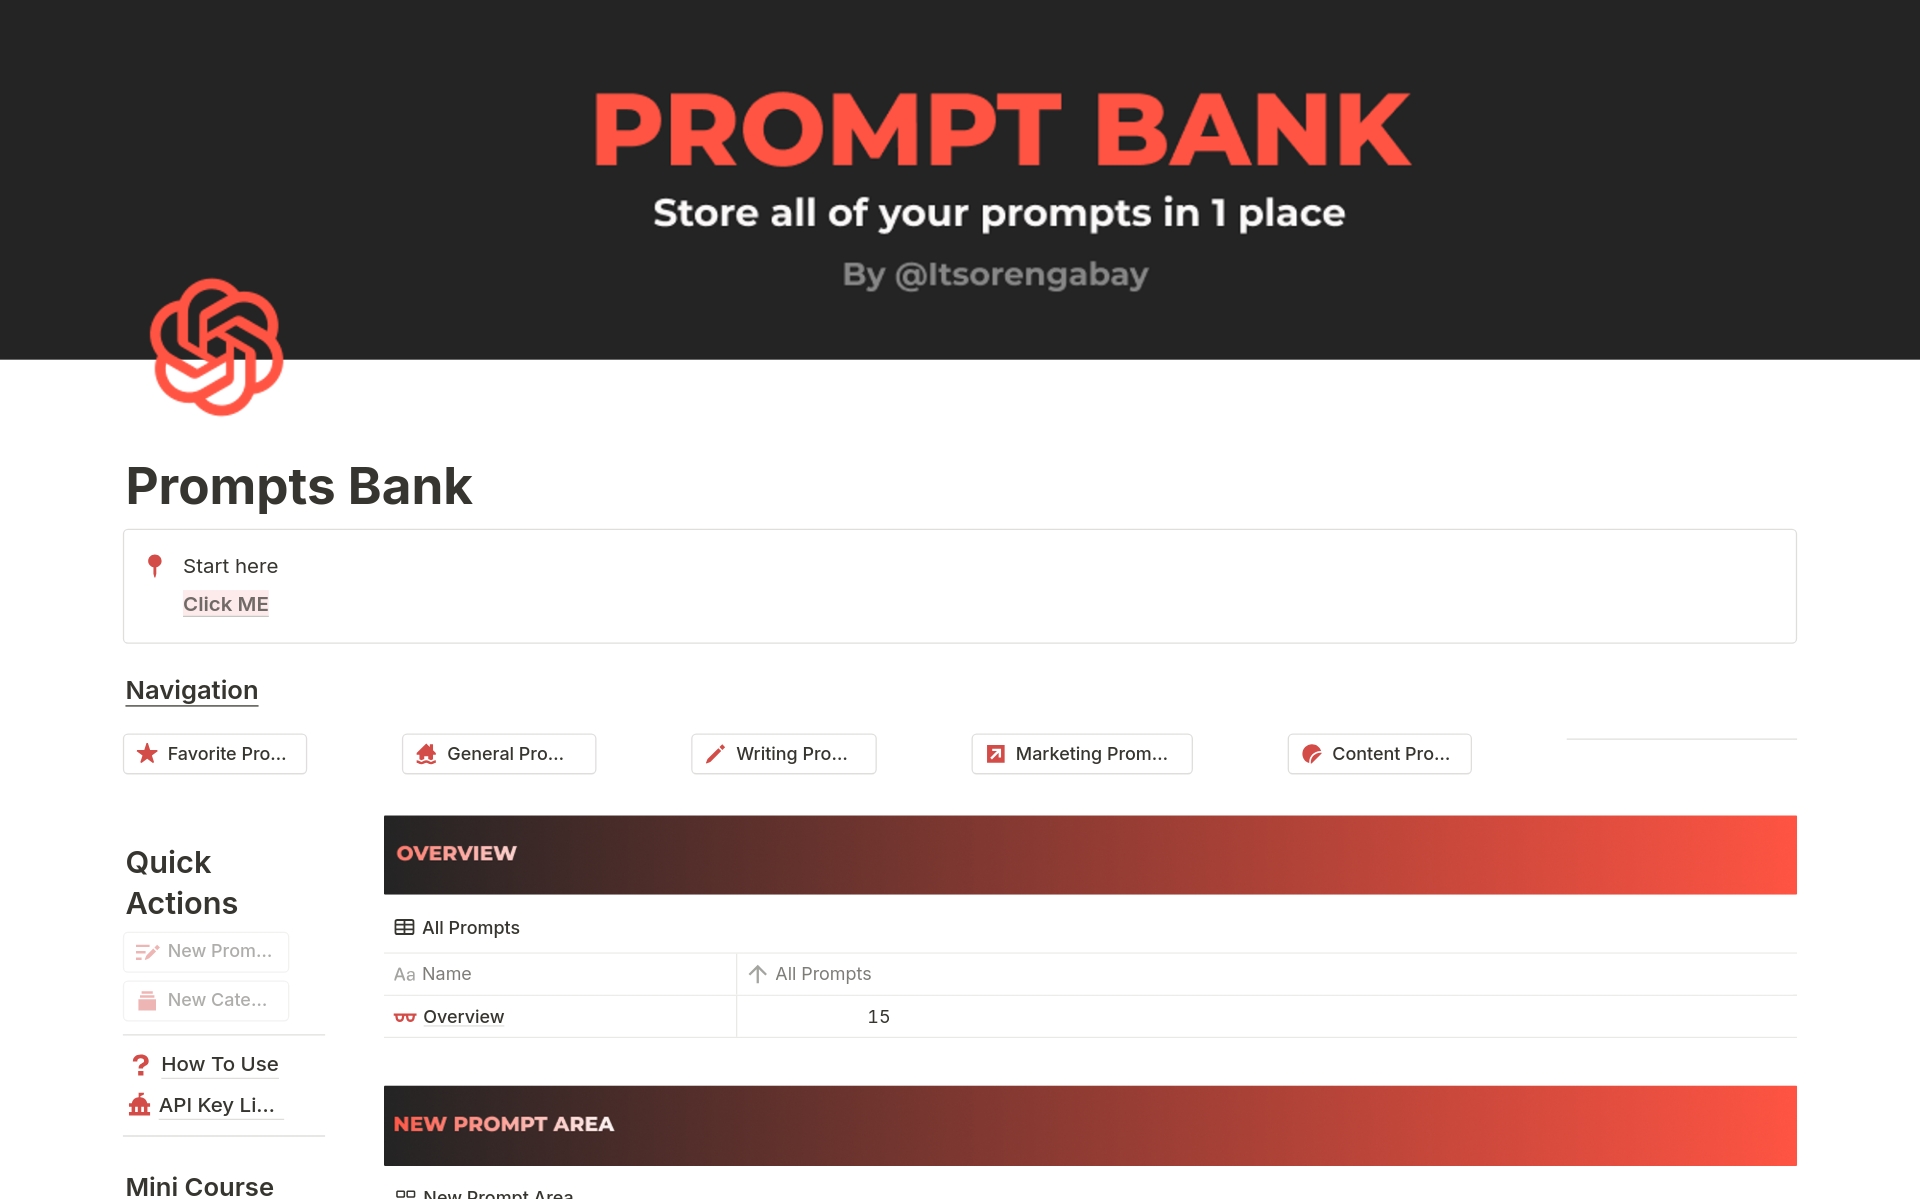 Store all of your prompts in 1 place and get access to a mini course that teaches you to write killer prompts for your creator business, along with 15 Power Prompts!